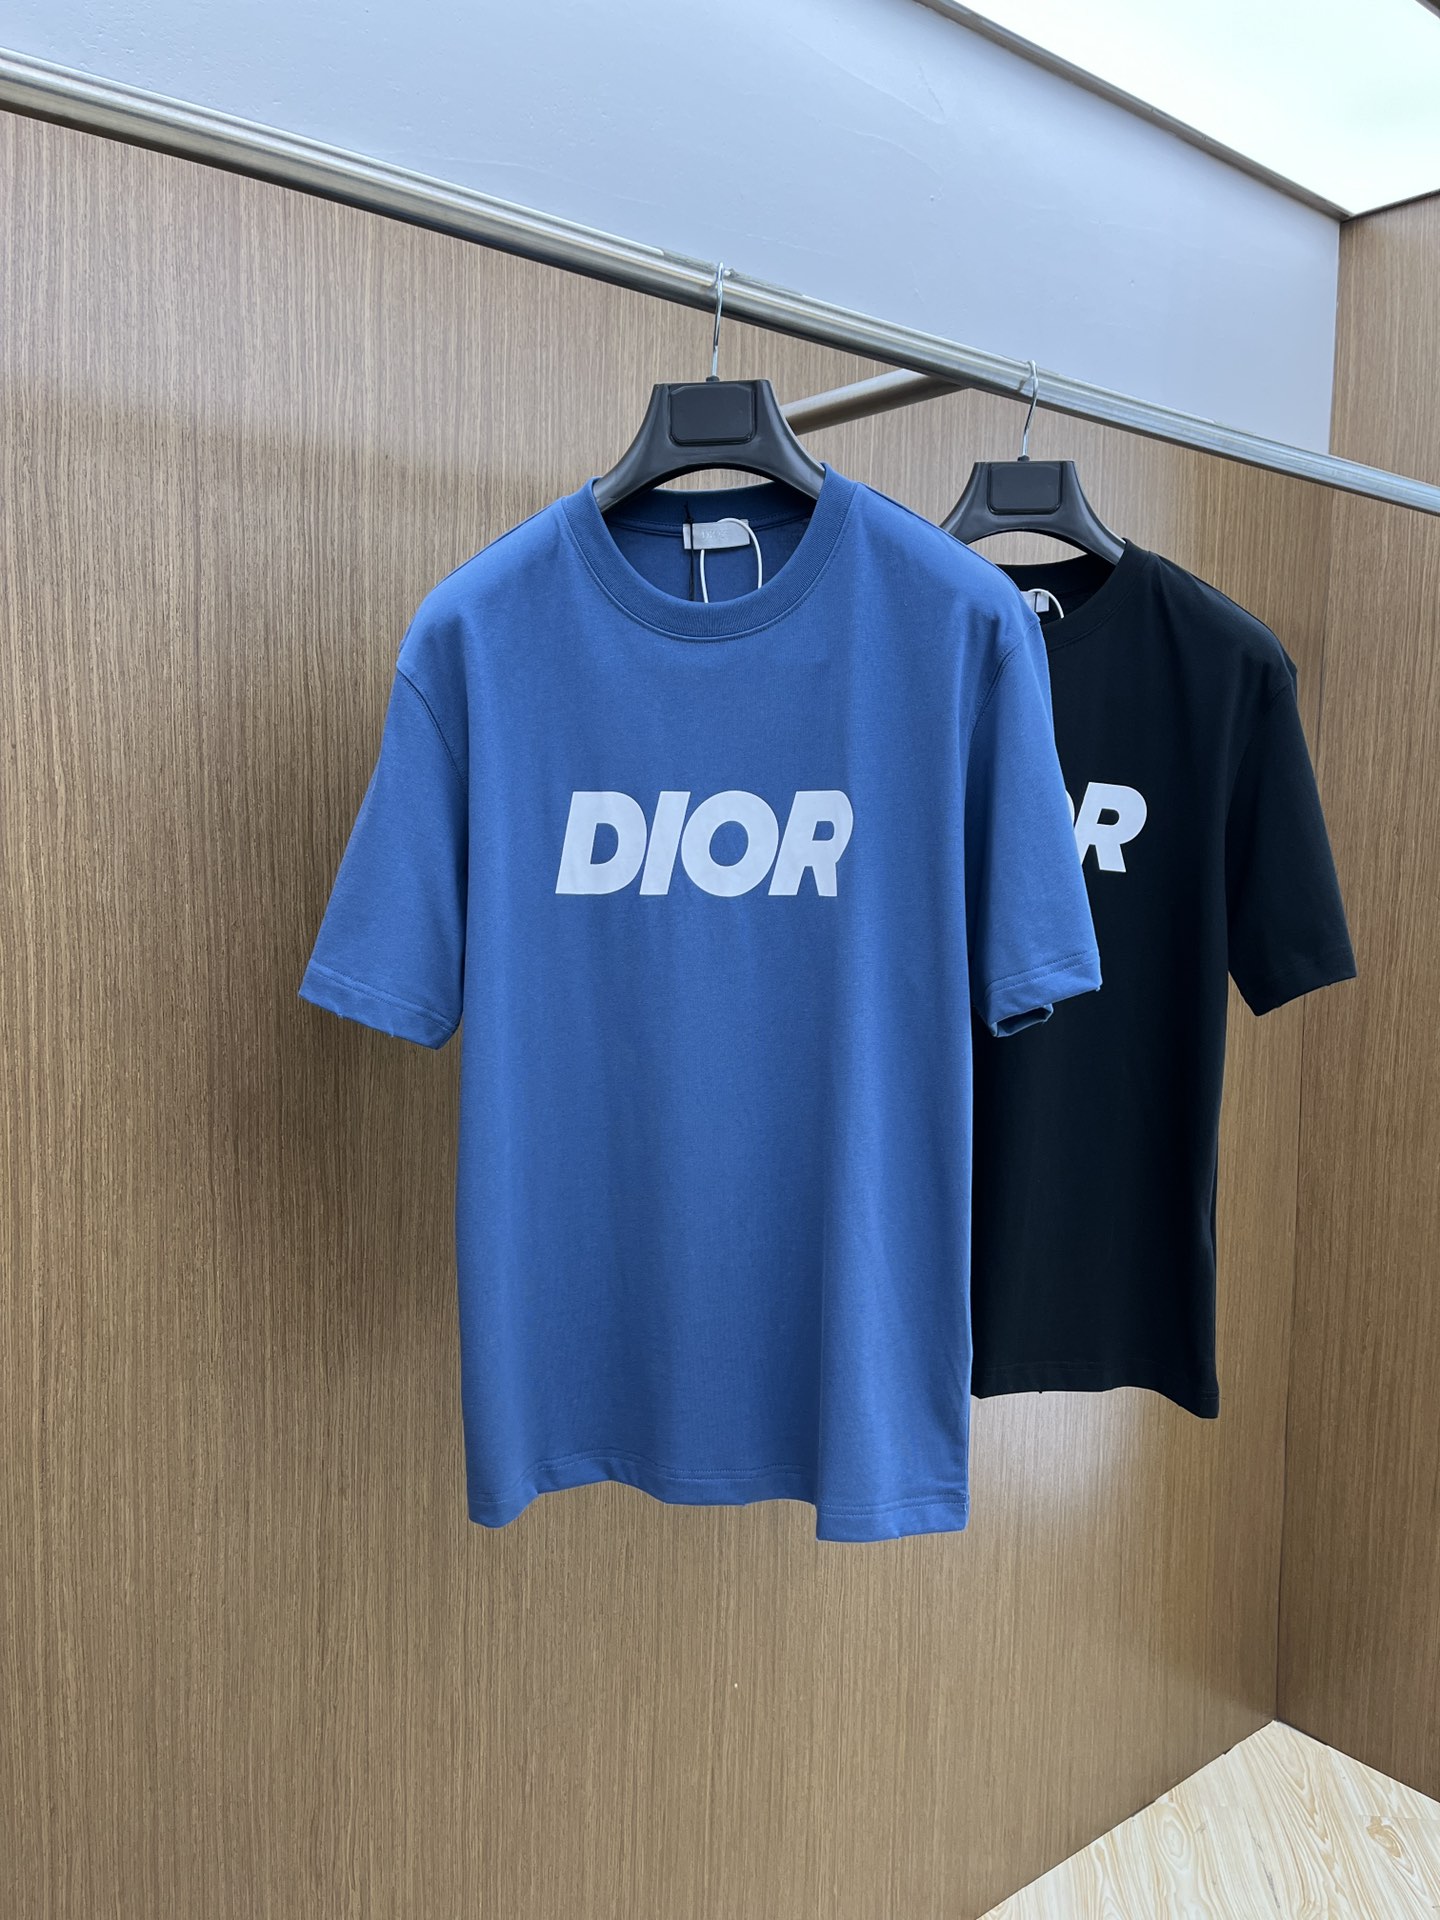 Dior Clothing T-Shirt High Quality Customize
 Black Blue Printing Unisex Cotton Knitting Summer Collection Short Sleeve